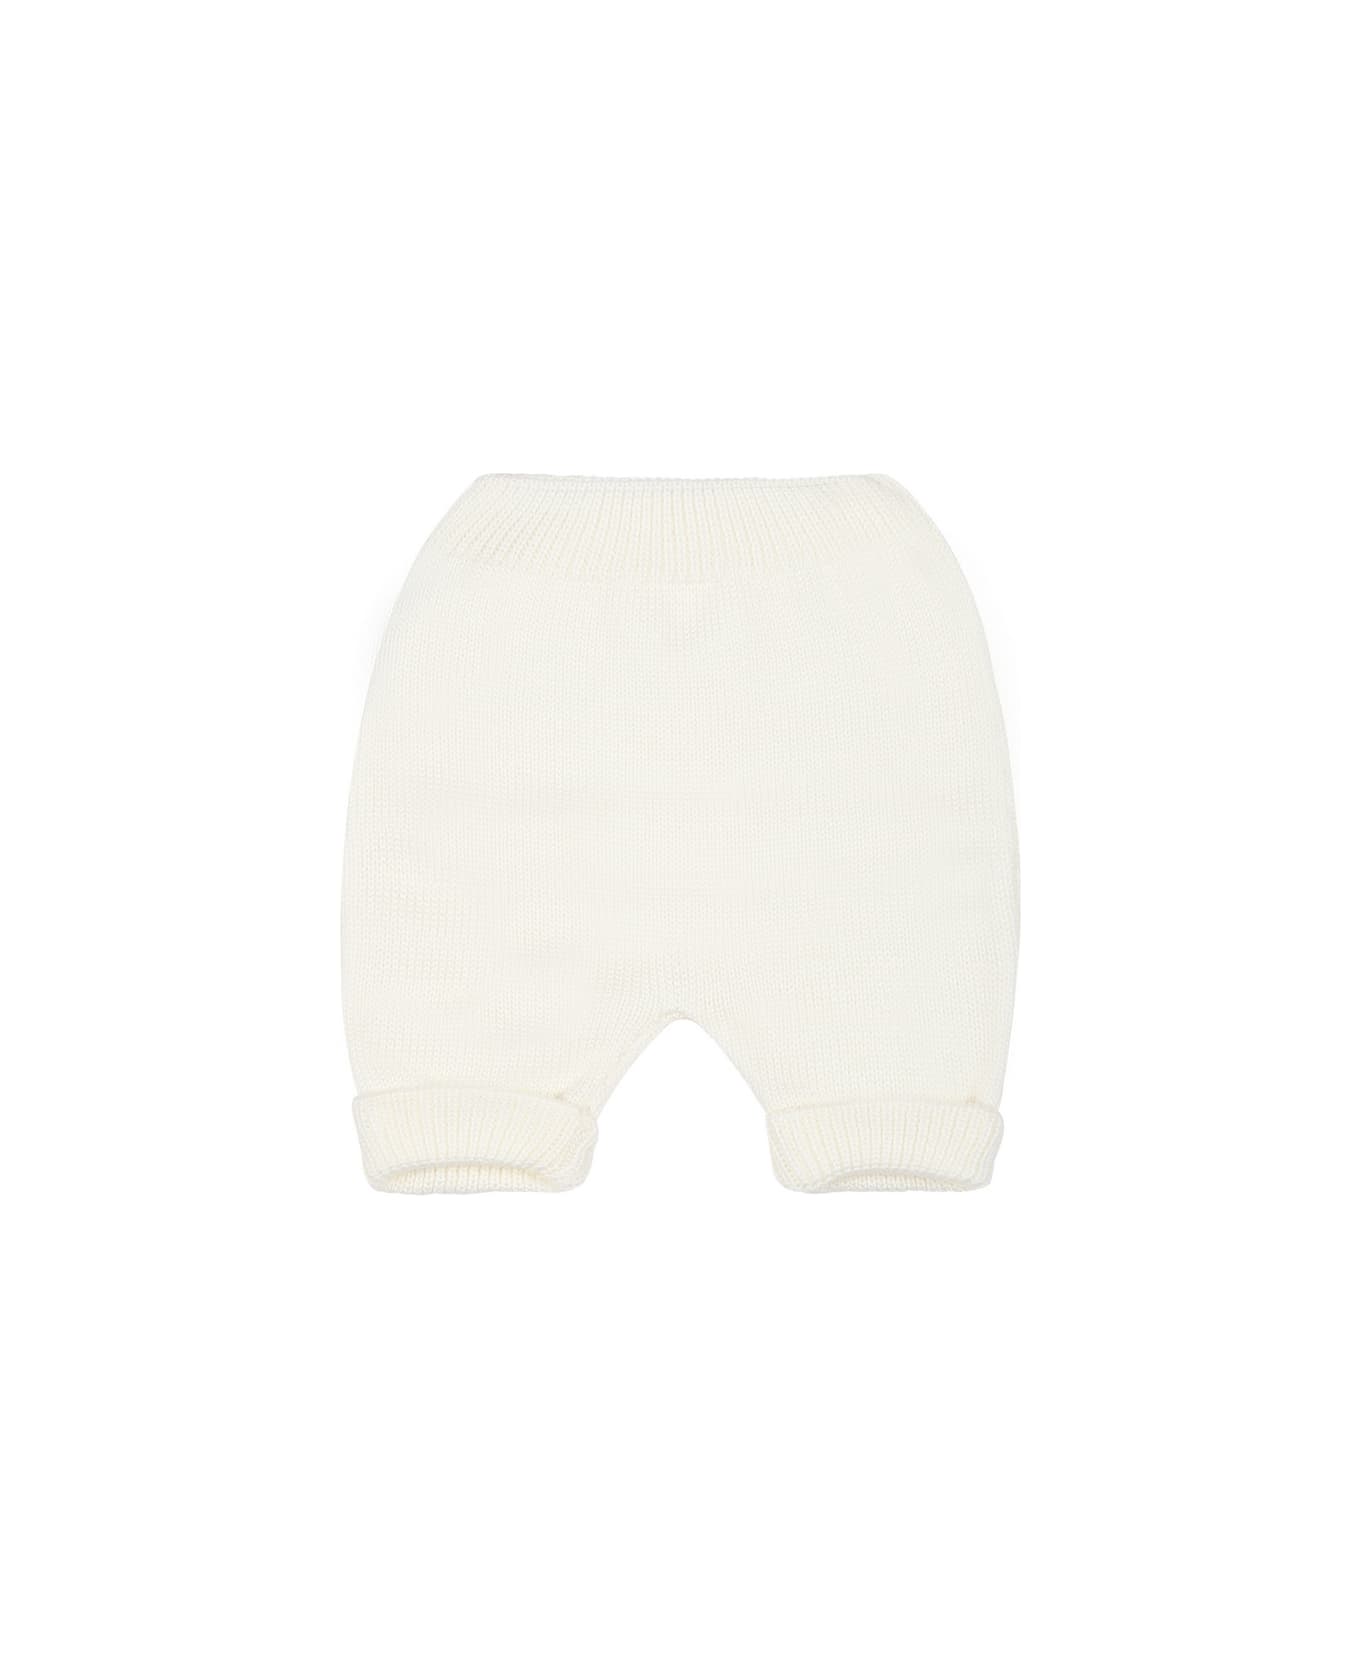 Little Bear White Casual Trousers For Baby Boy - White ボトムス